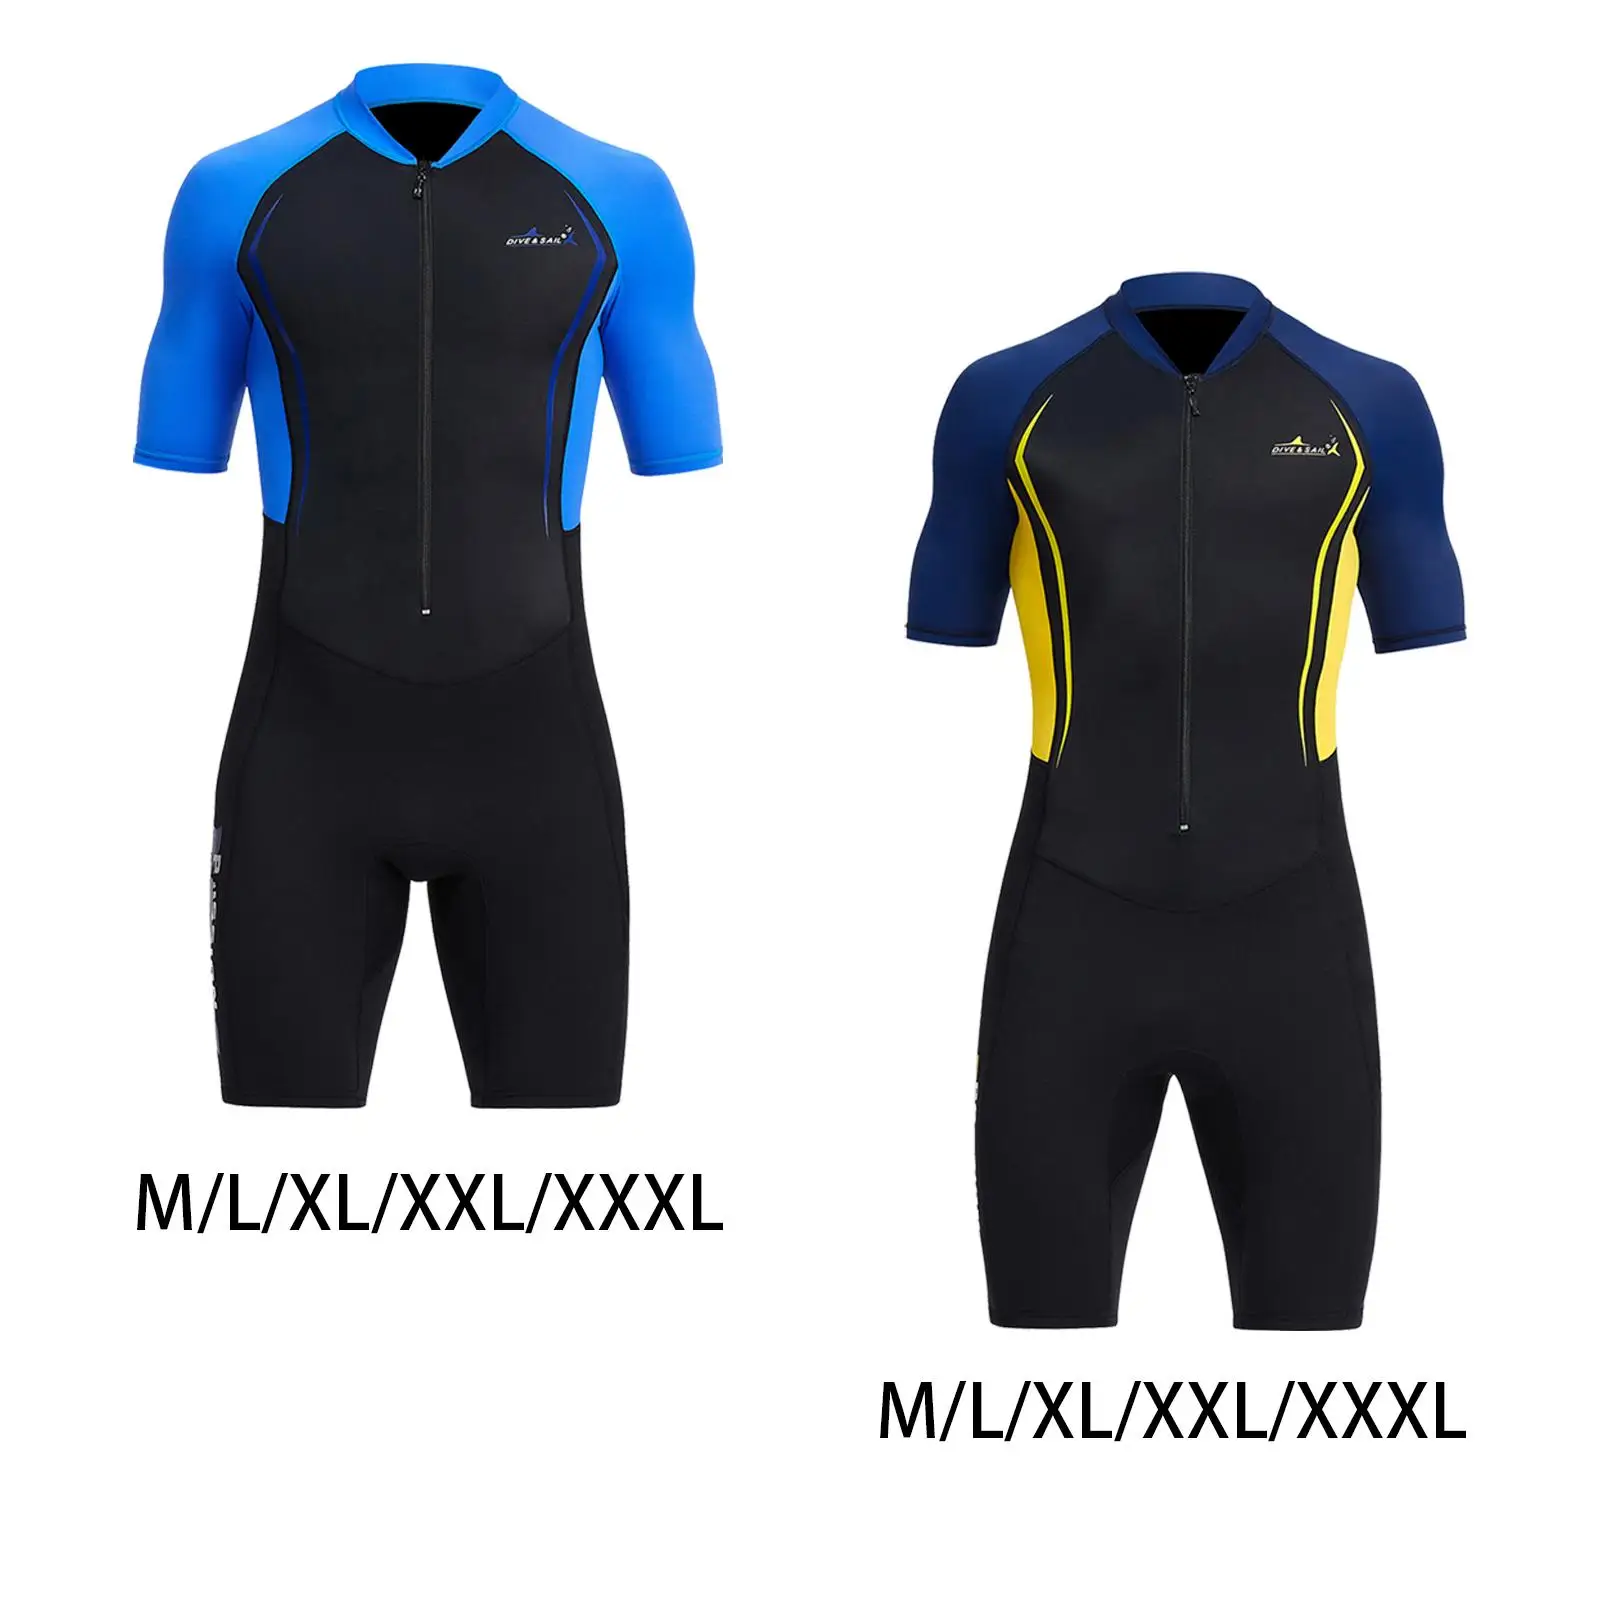 Mens Shorty Wetsuit Sun Protective Short Sleeve Full Body 1.5mm Suit Swimsuit for Diving Surfing Spearfishing Snorkeling